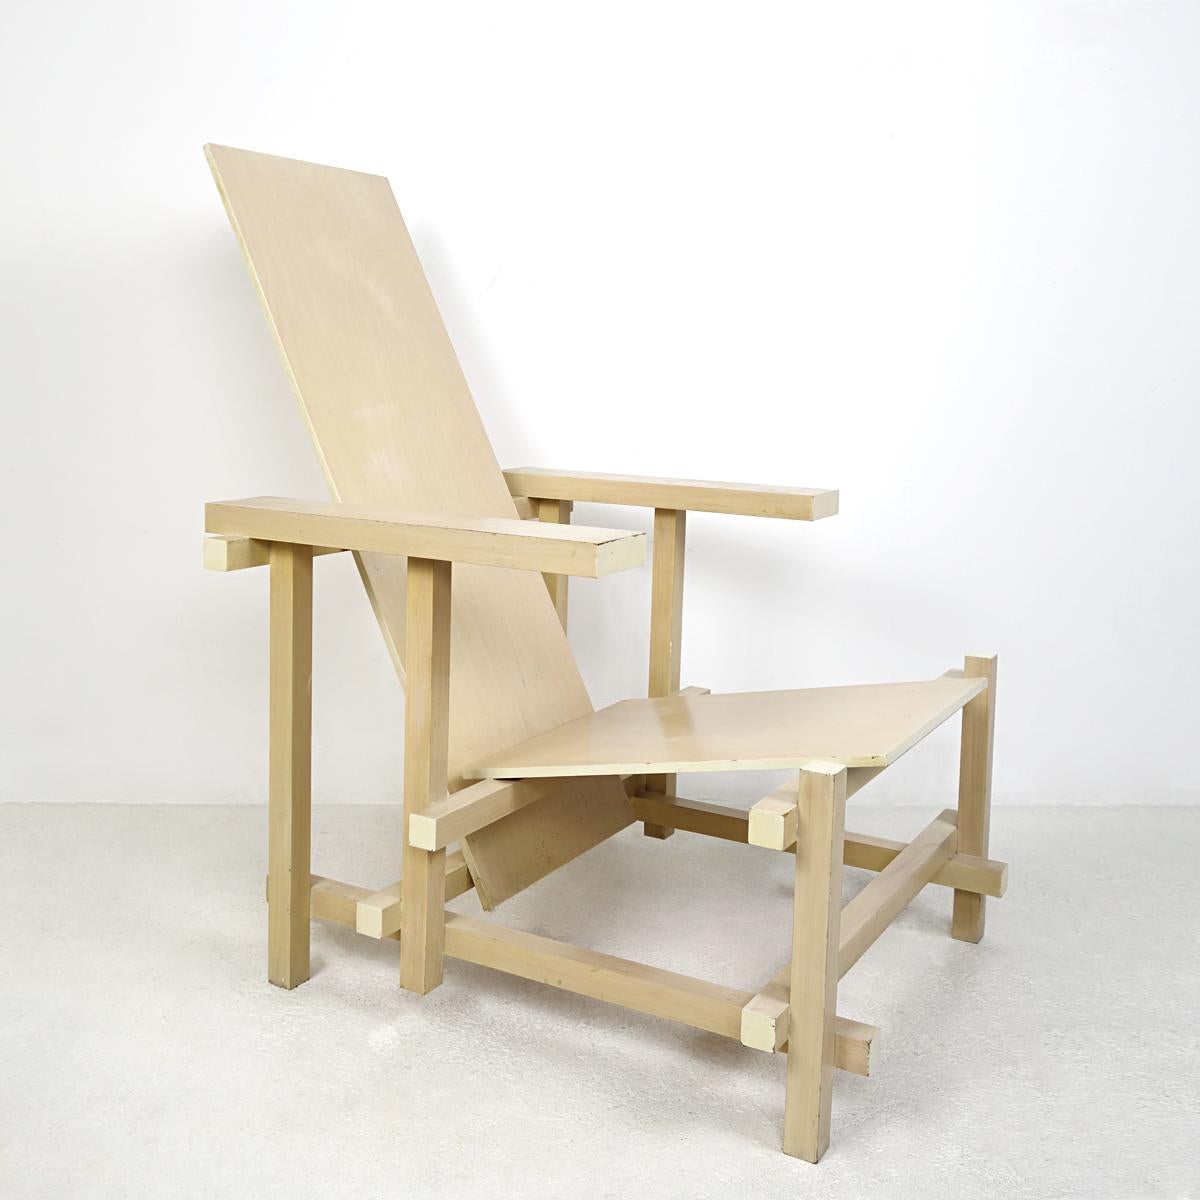 Modernist Chair Made of Uncolored Lacquered Wood after Gerrit Rietveld's Design 3